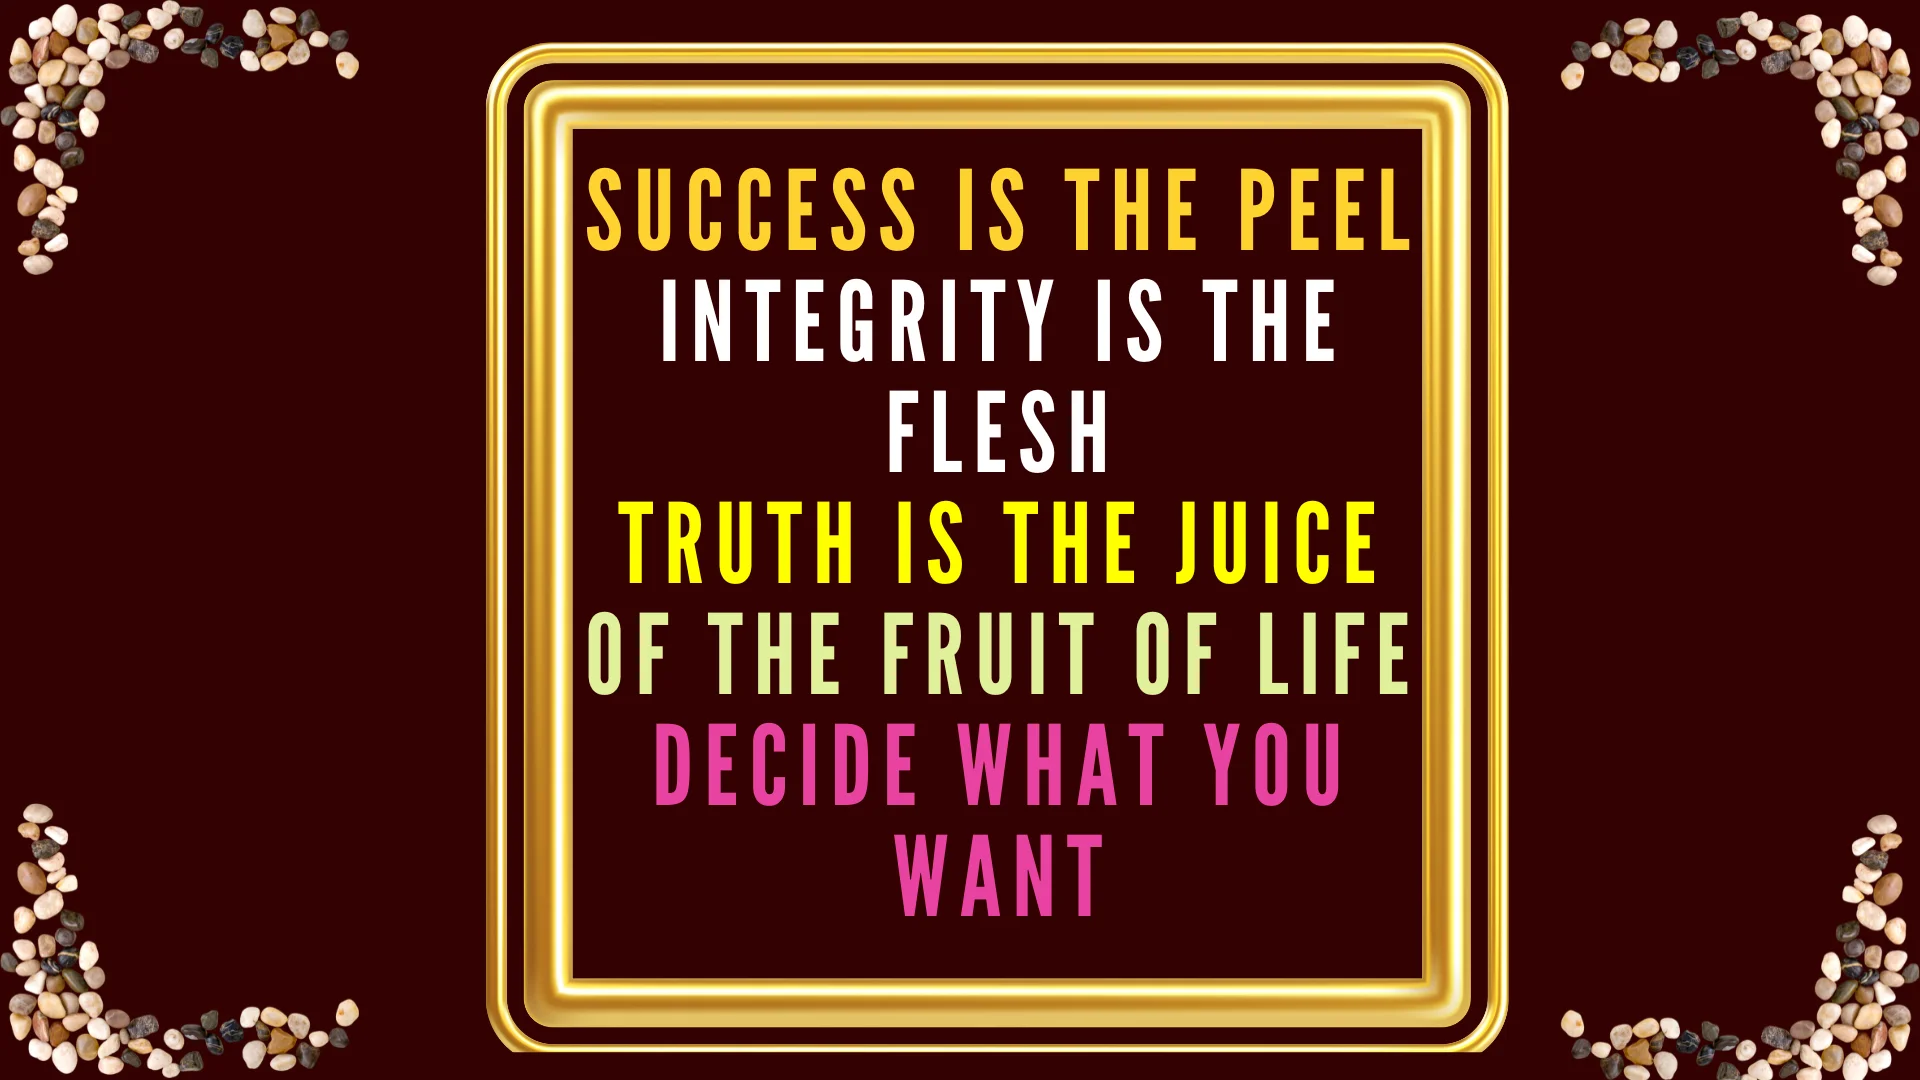 SUCCESS INTEGRITY TRUTH